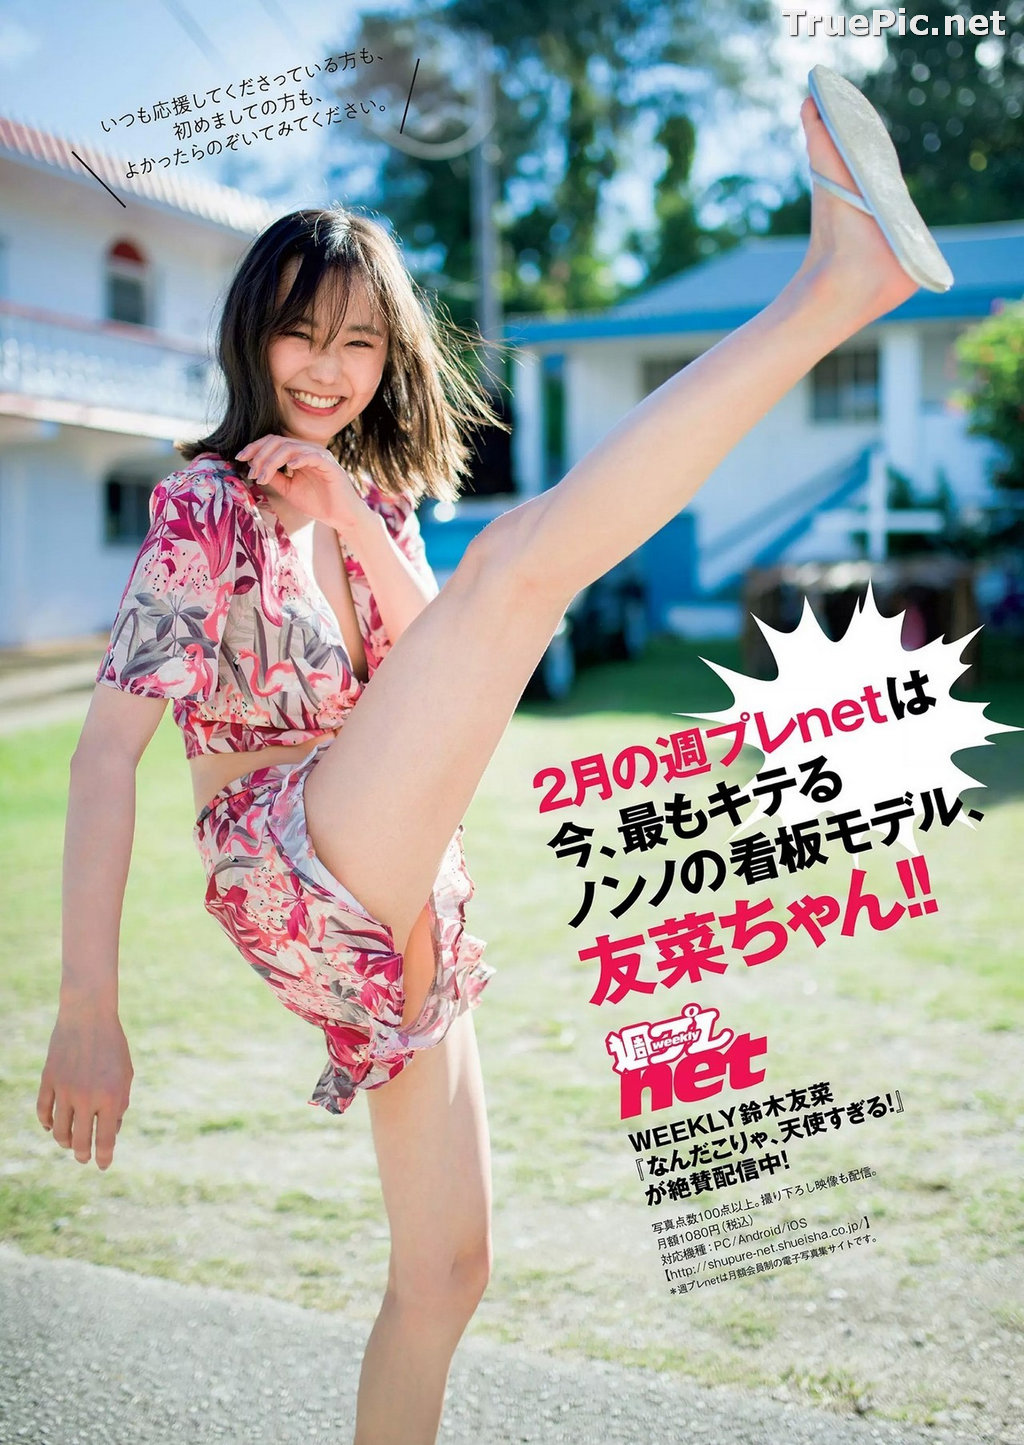 Image Japanese Model and Actress - Yuuna Suzuki - Sexy Picture Collection 2020 - TruePic.net - Picture-45